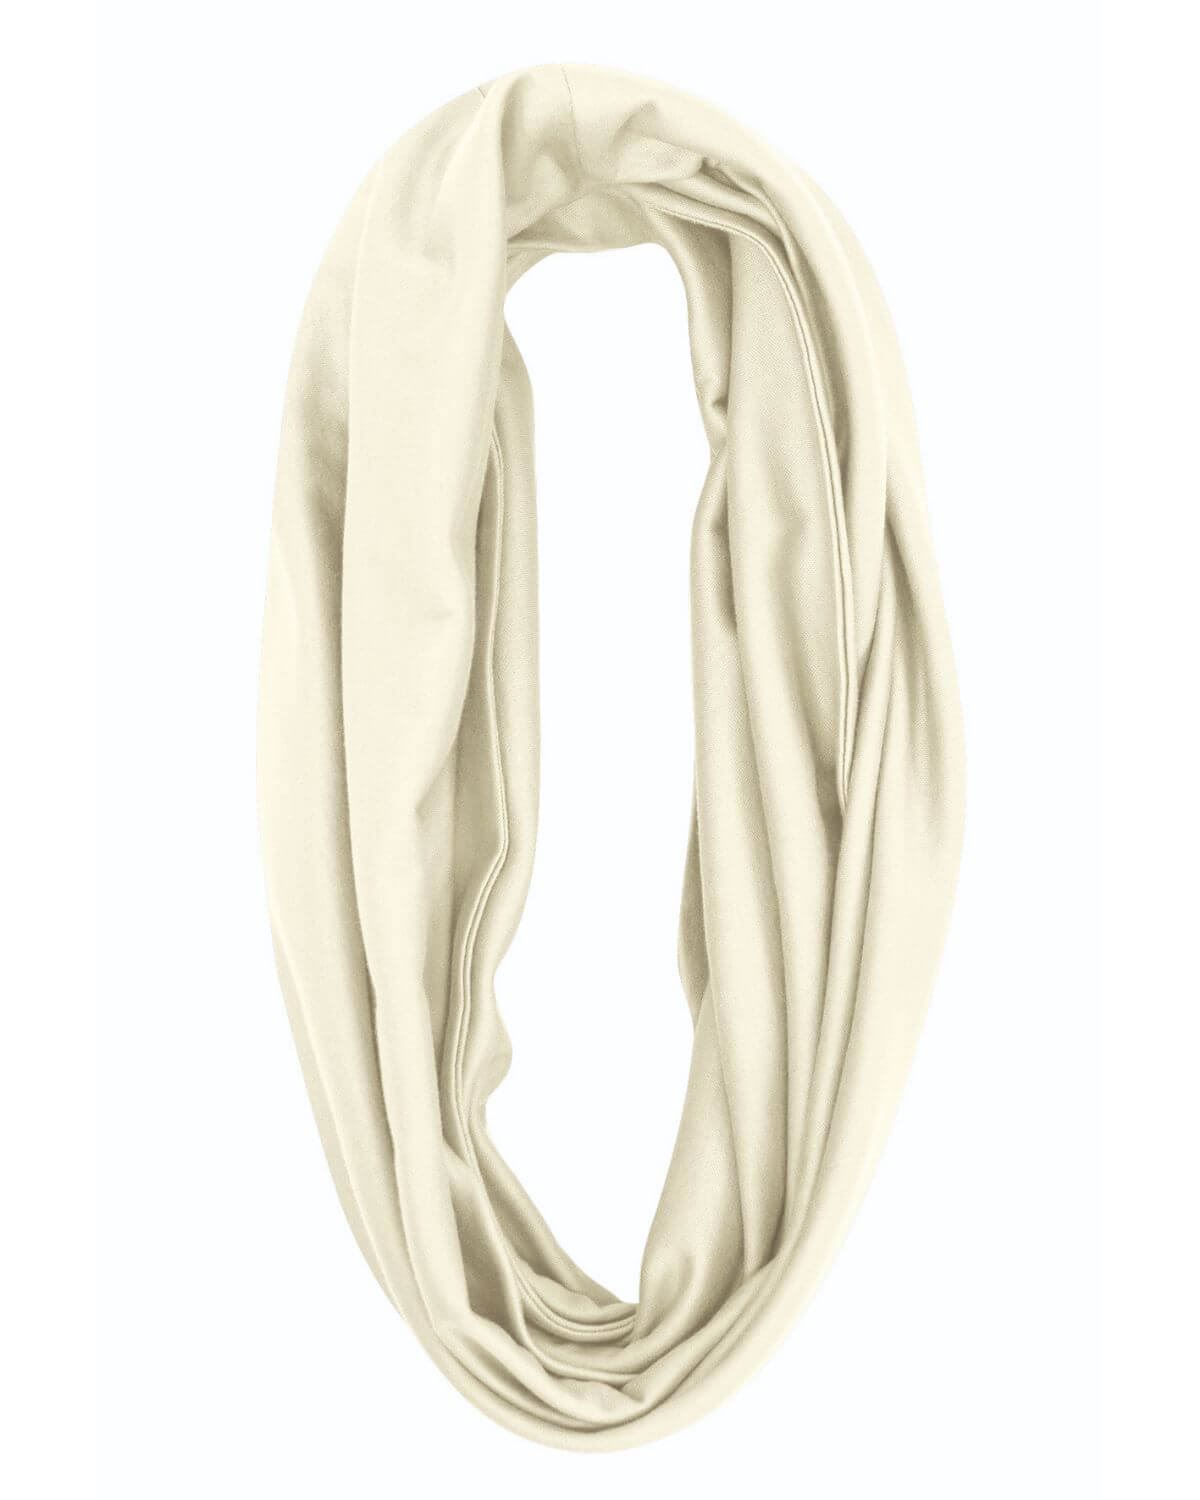 Ladies Silky Cotton Snood Scarf. Available in colours shown.